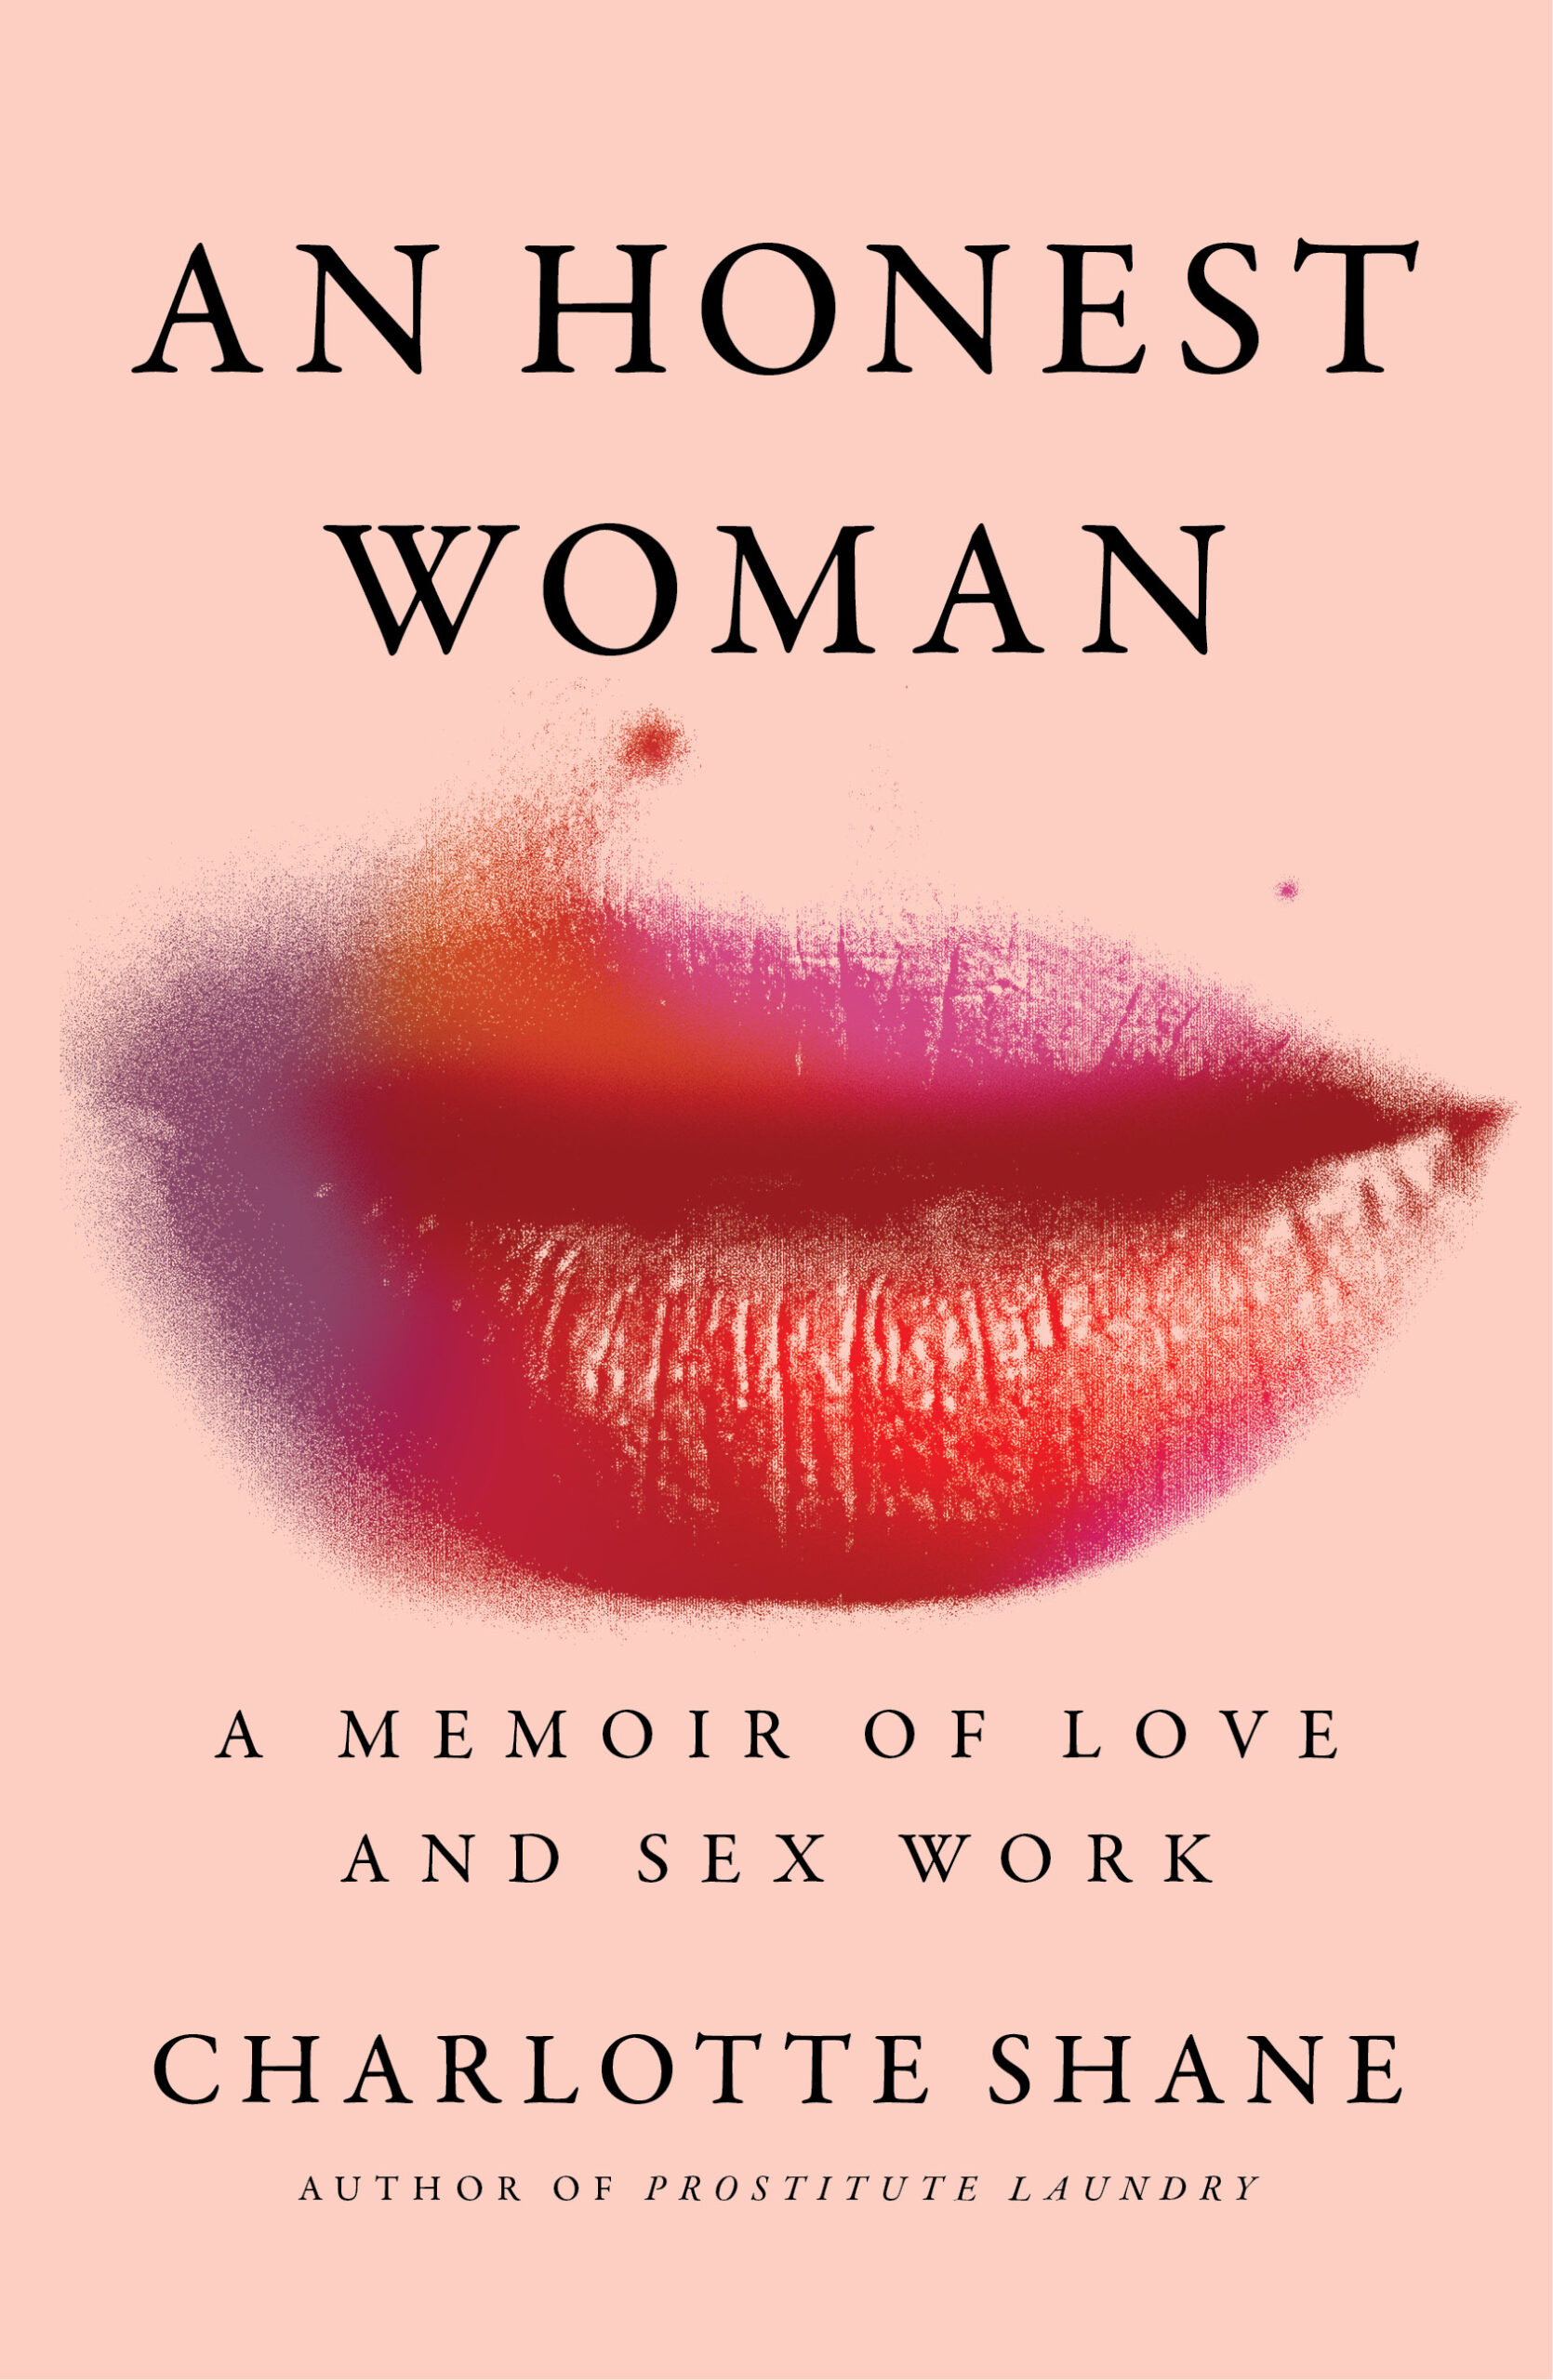 Book Launch: An Honest Woman by Charlotte Shane in conversation with Estelle Tang